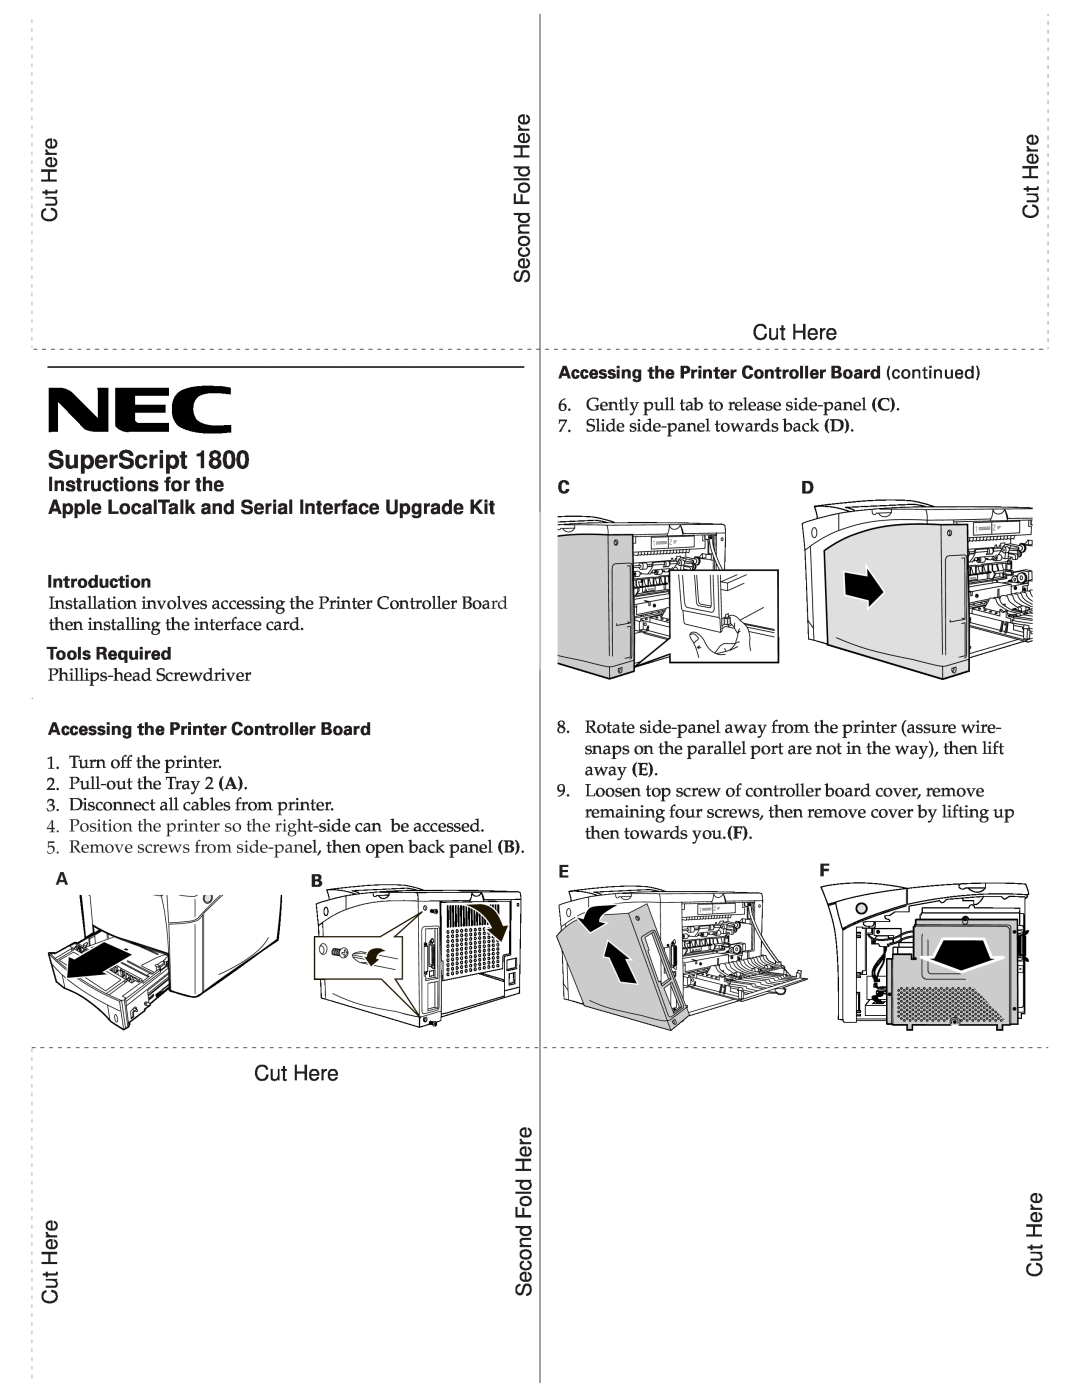 NEC 1800 Cut Here, Second Fold Here, SuperScript, Instructions for the, Apple LocalTalk and Serial Interface Upgrade Kit 